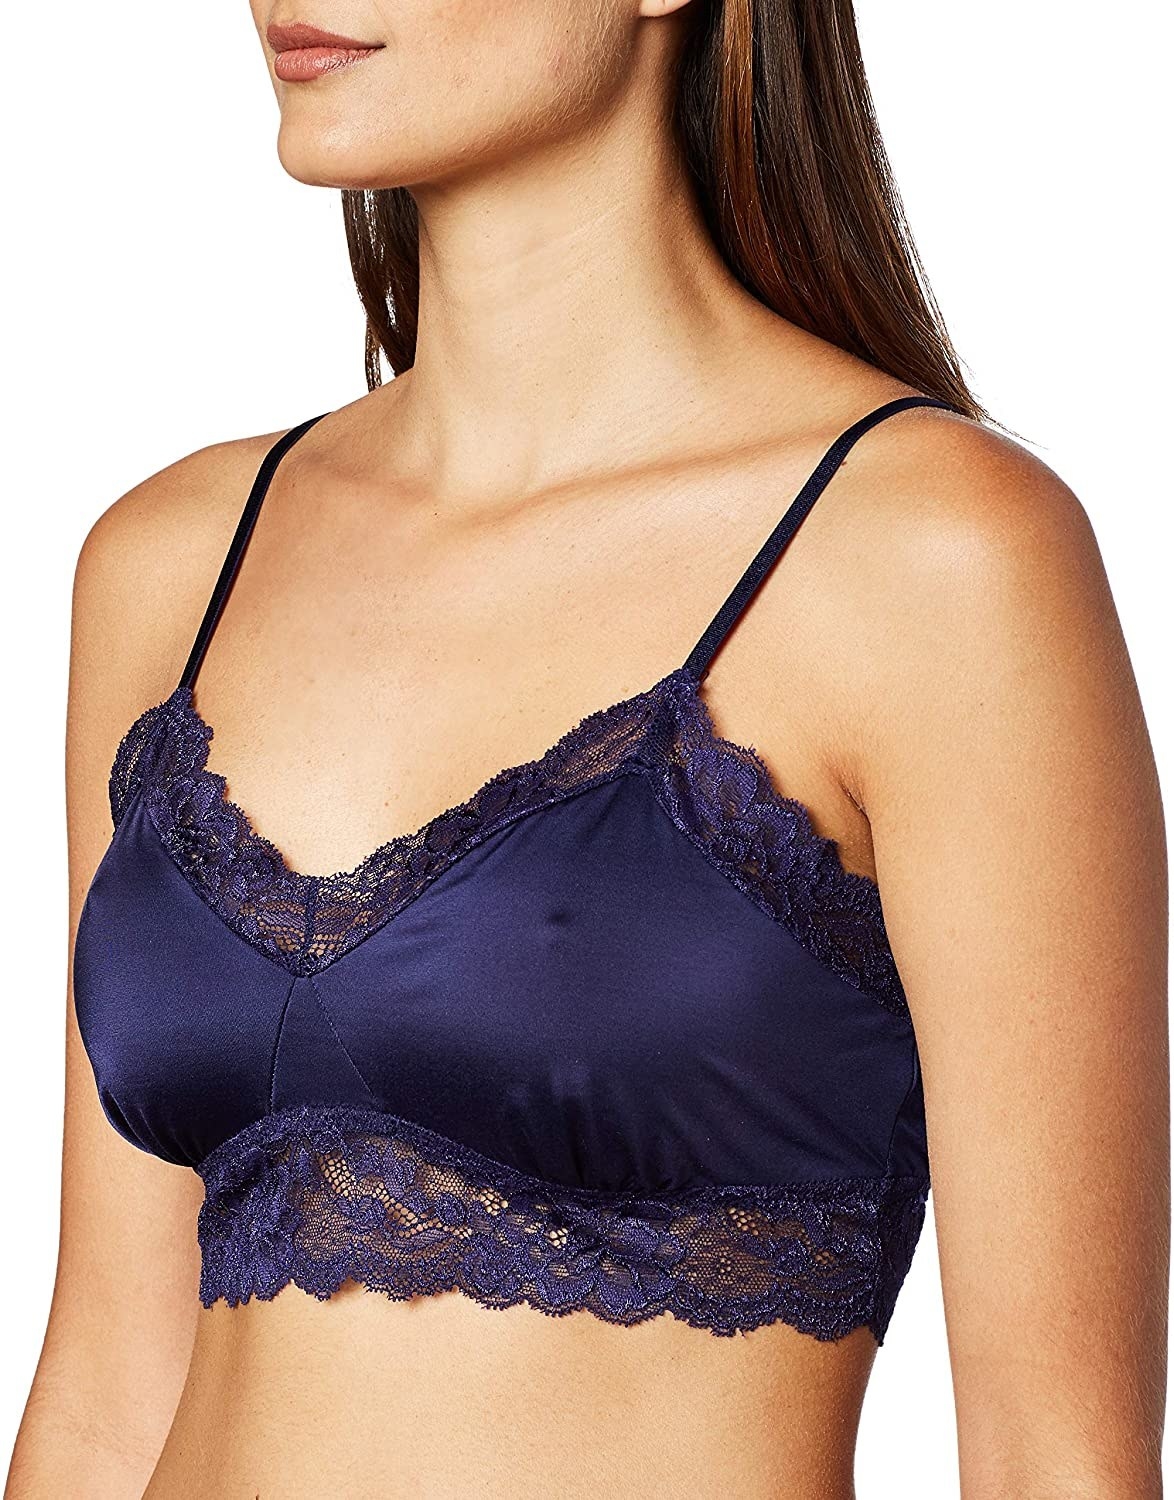 model wearing navy blue bralette with lace 